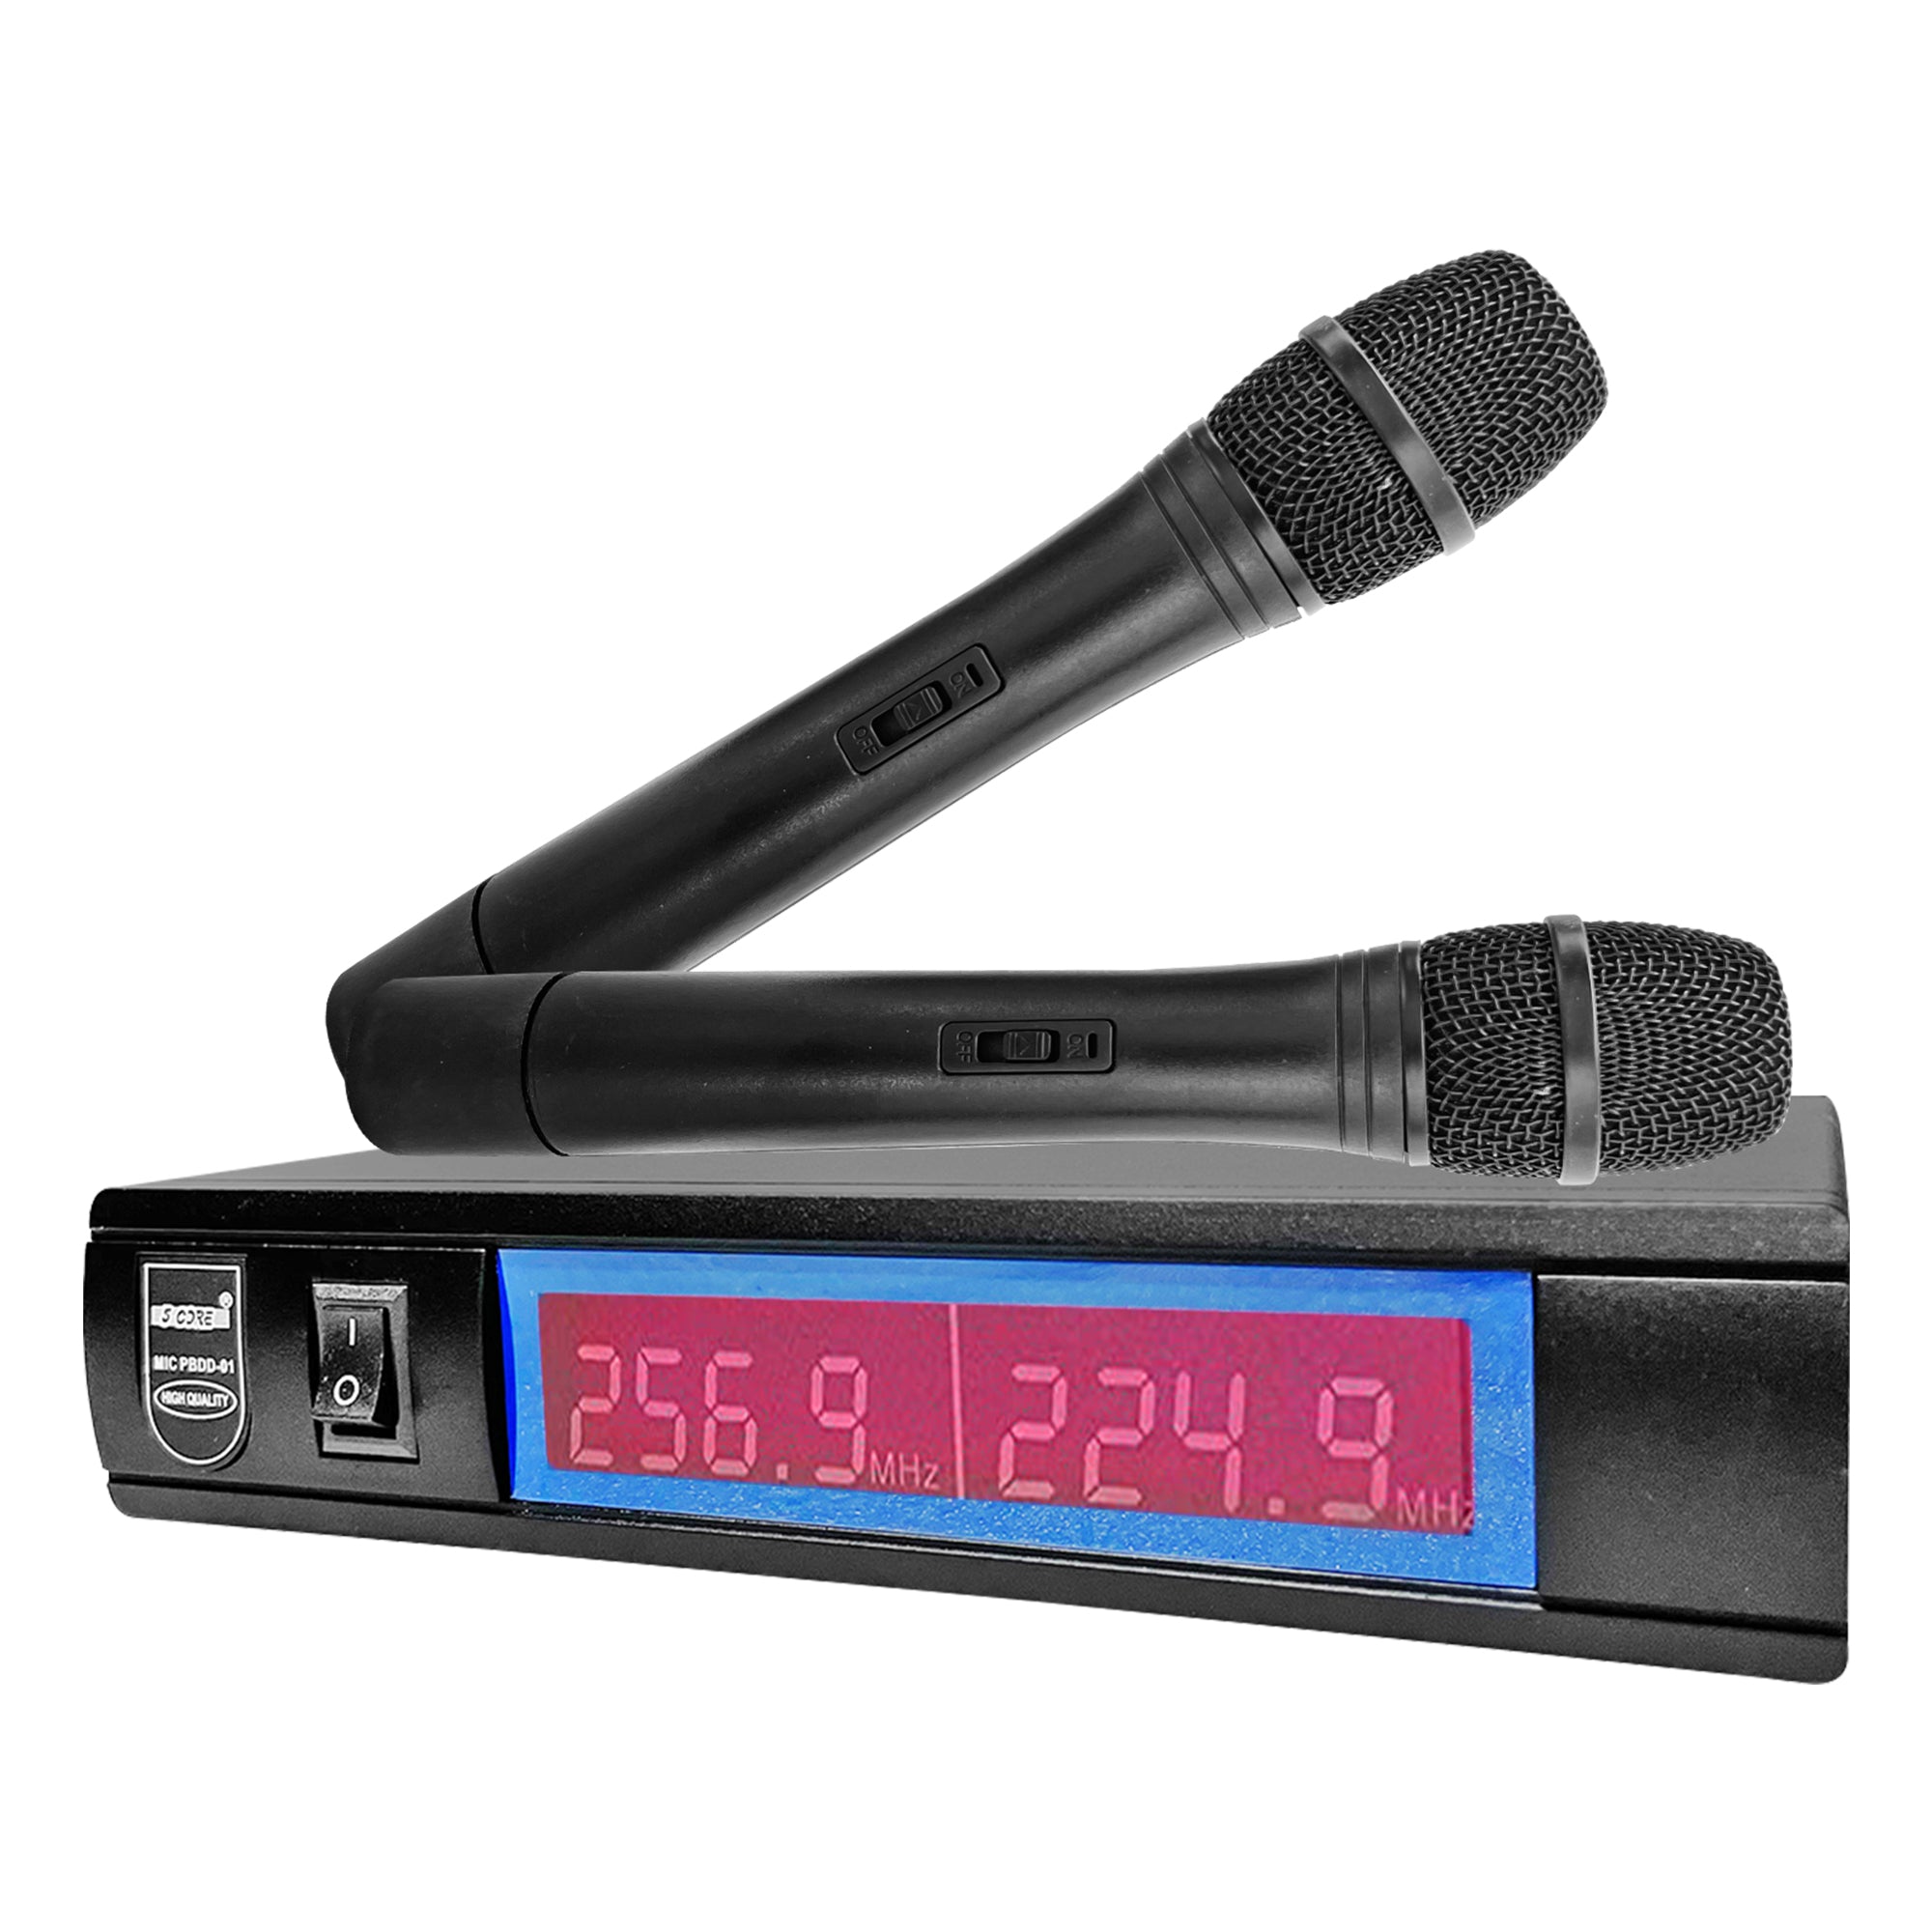 Wireless Microphone at Lowest Price Buy Now- 5 Core